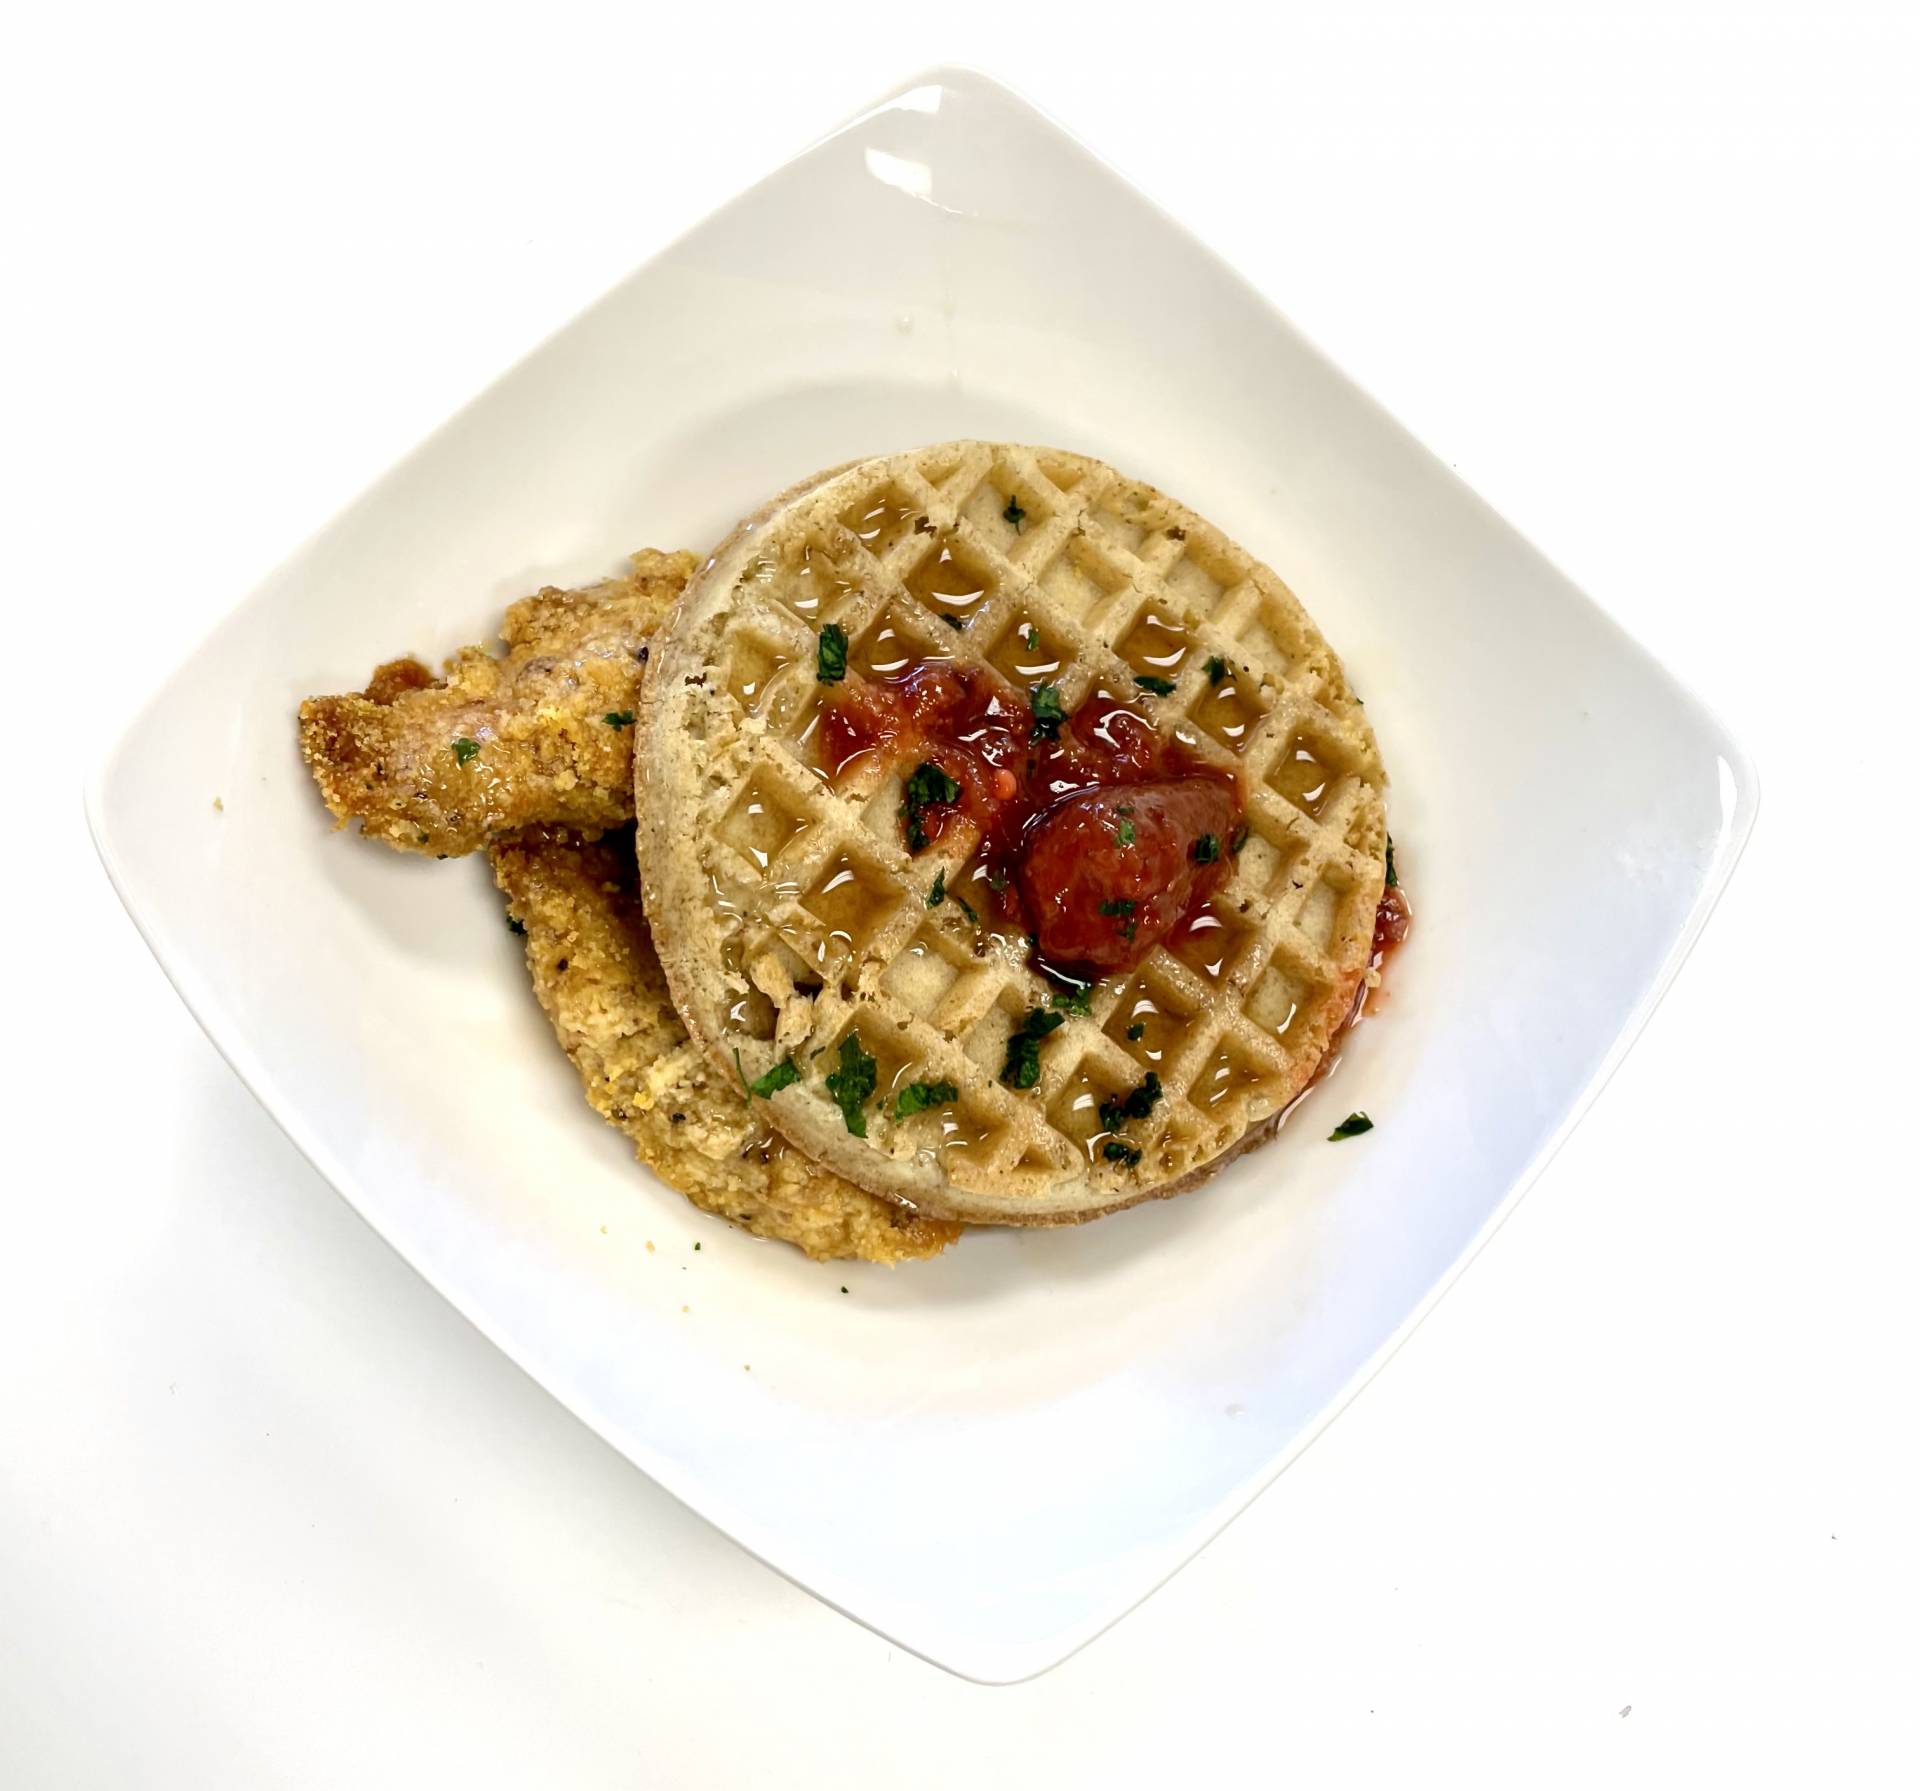 Chicken and Waffles with a Strawberry Glaze - Low Fat